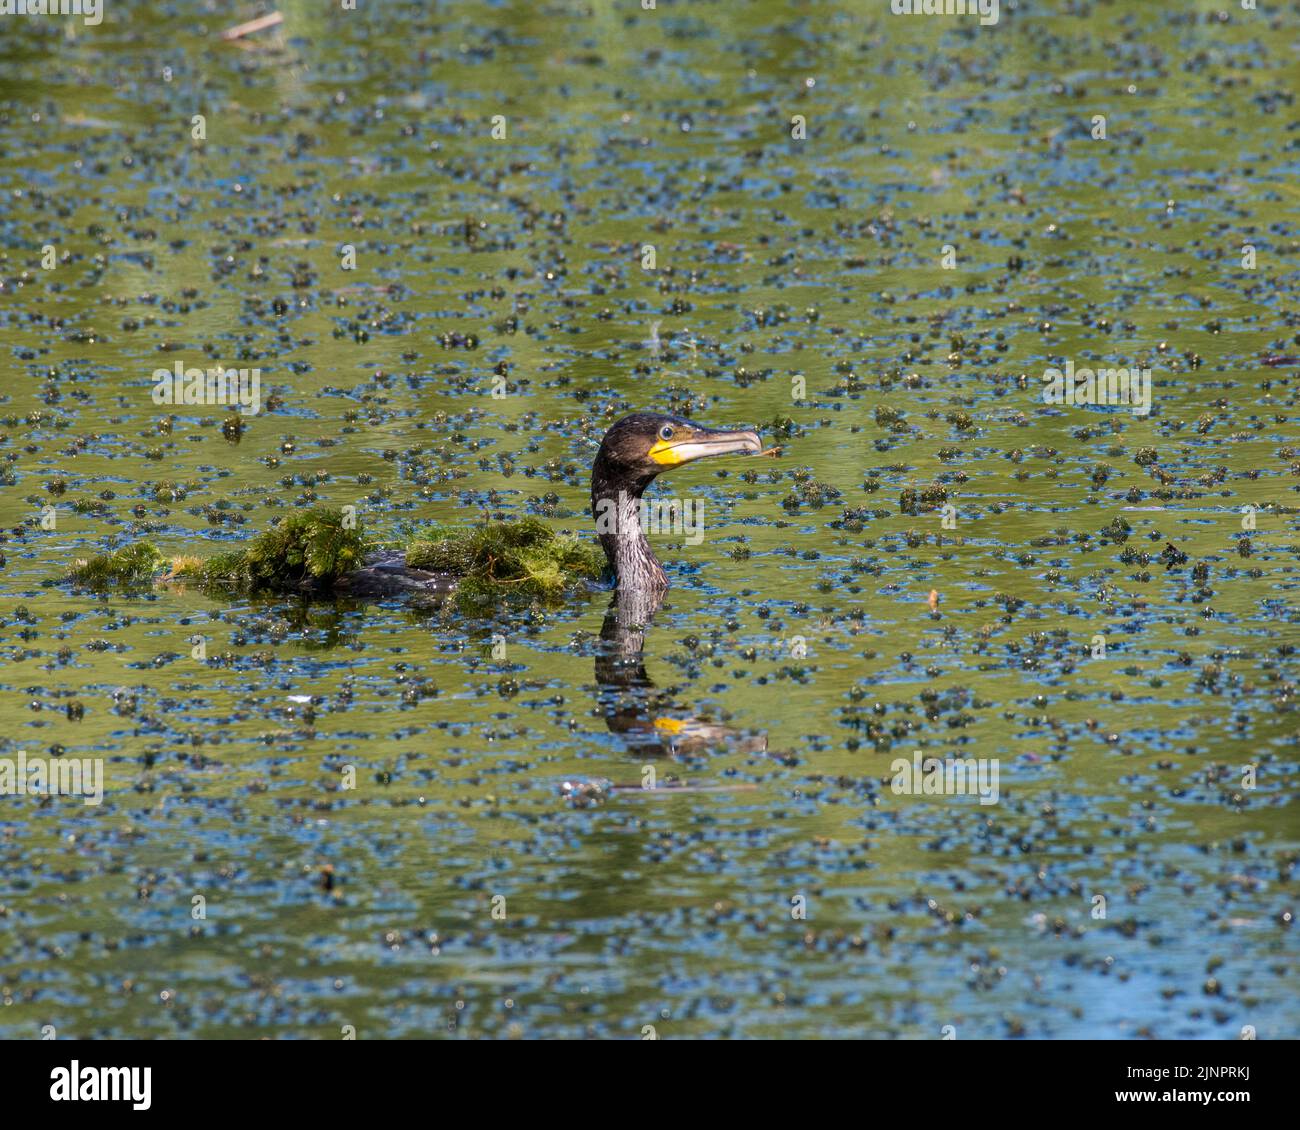 A cormorant fishing at Magor Marsh in Monmouthshire, Wales, UK. The marsh is drying up highlighting global warming and climate change. Stock Photo